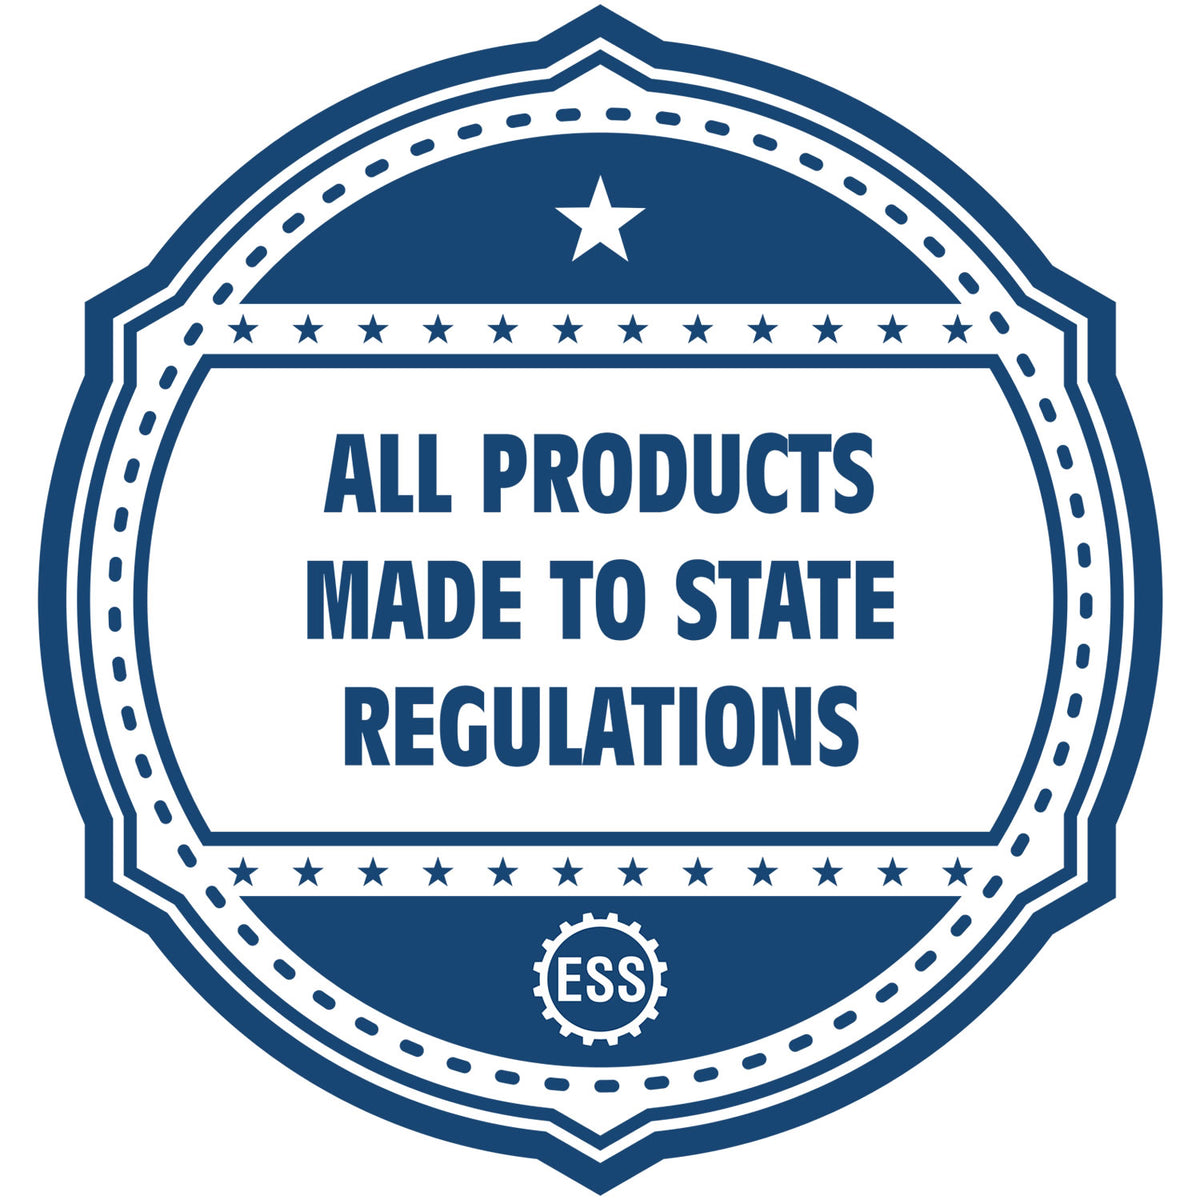 An icon or badge element for the Handheld North Dakota Architect Seal Embosser showing that this product is made in compliance with state regulations.